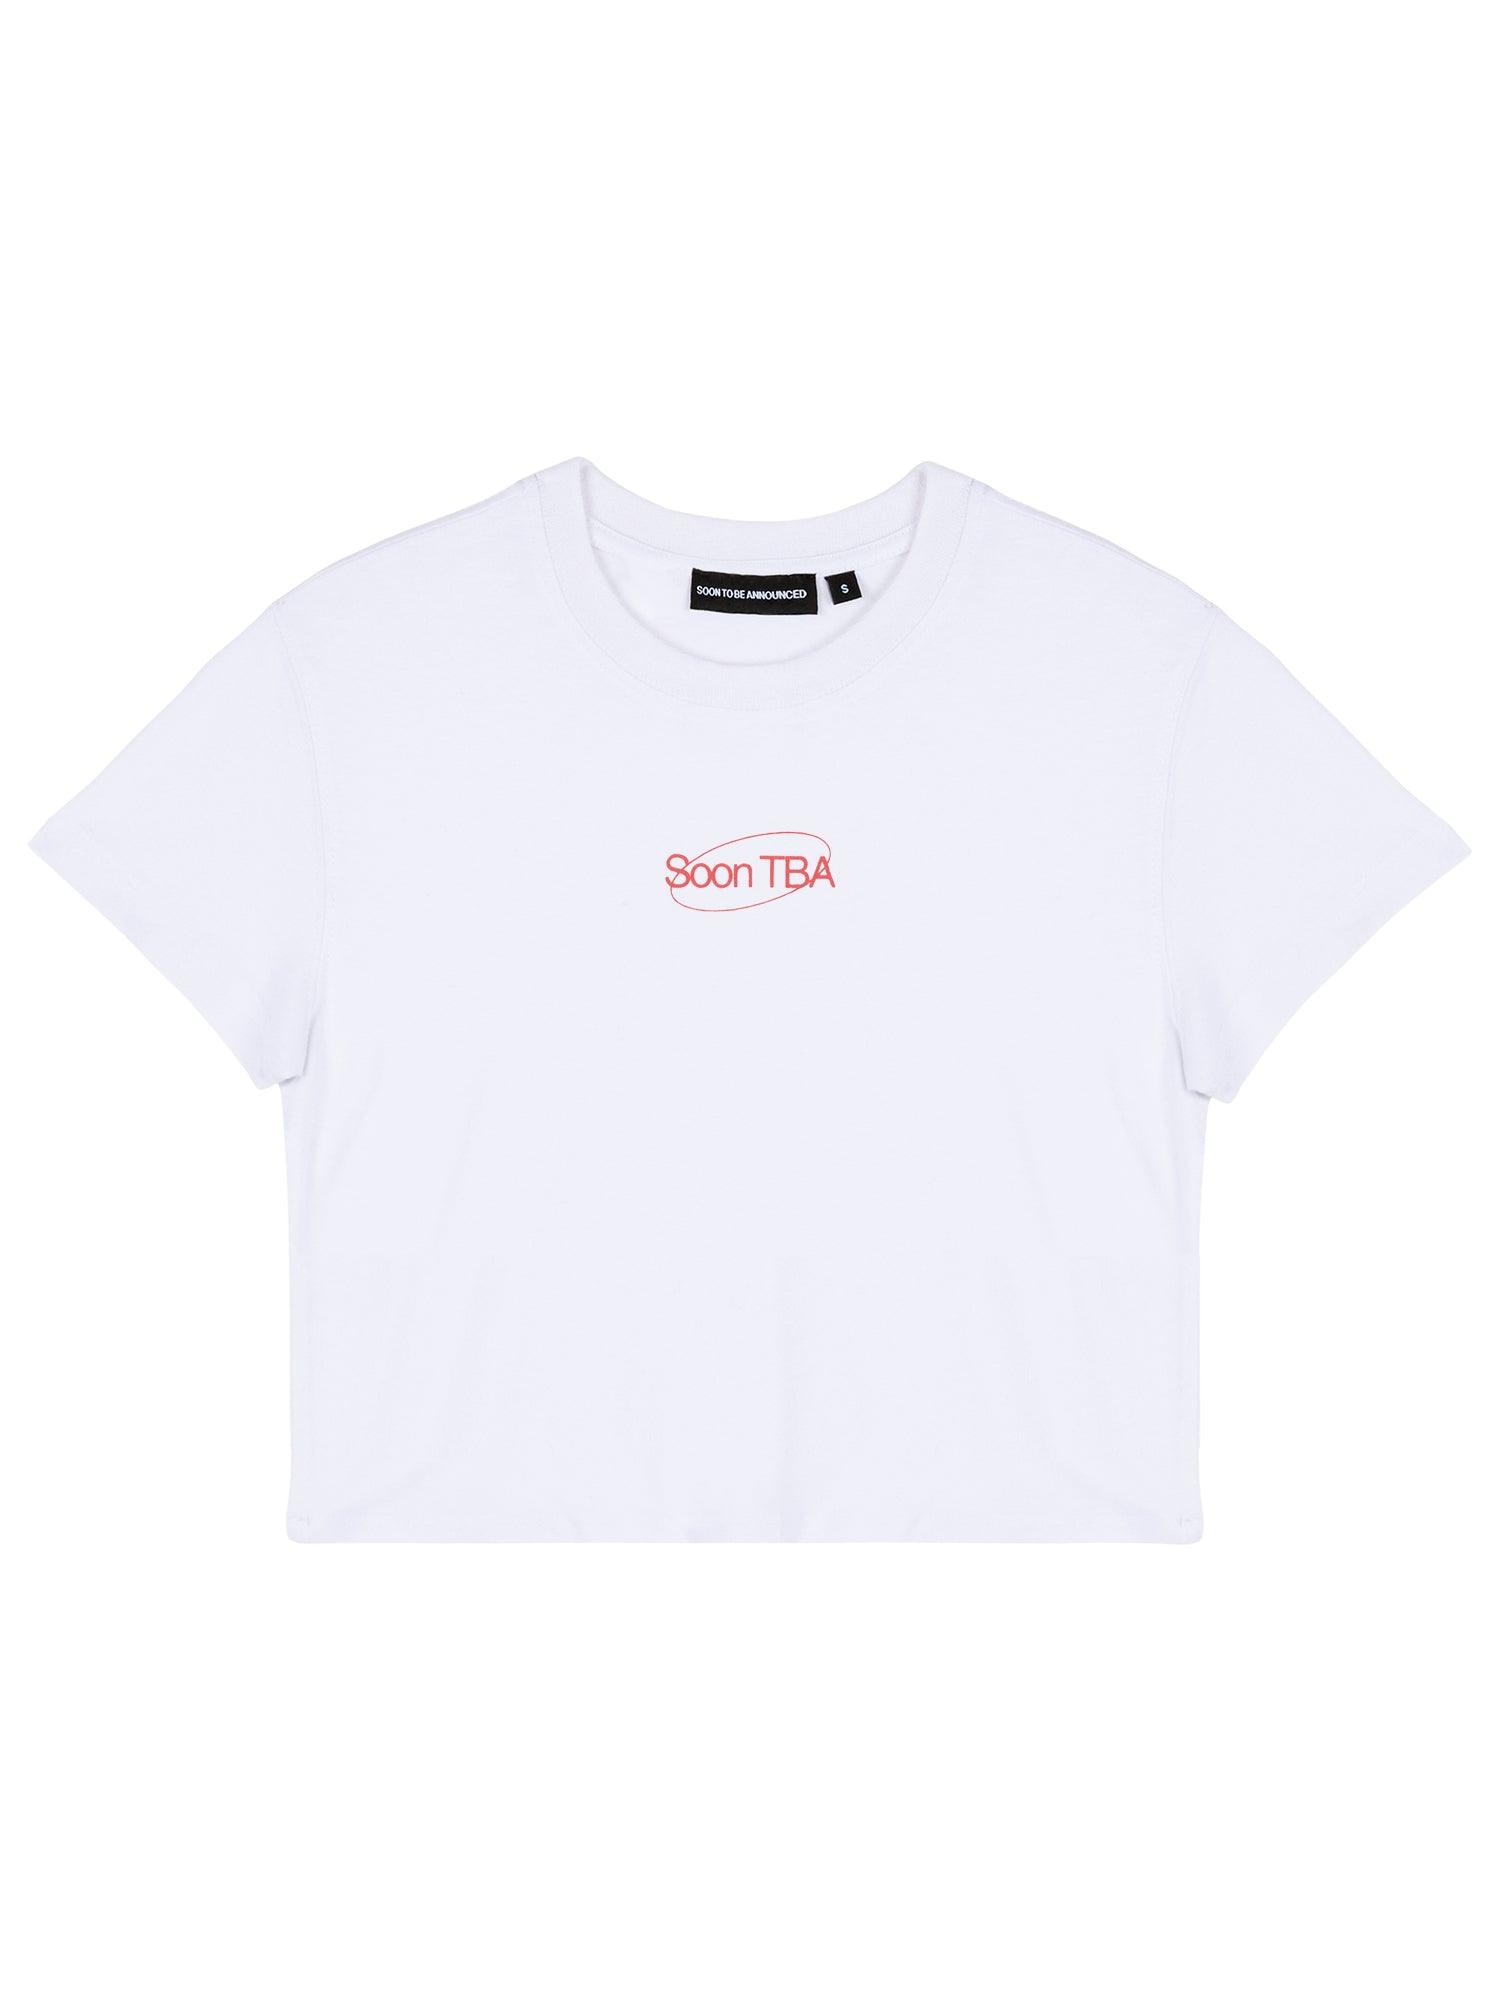 Soon Services Baby Tee - SOON TO BE ANNOUNCED